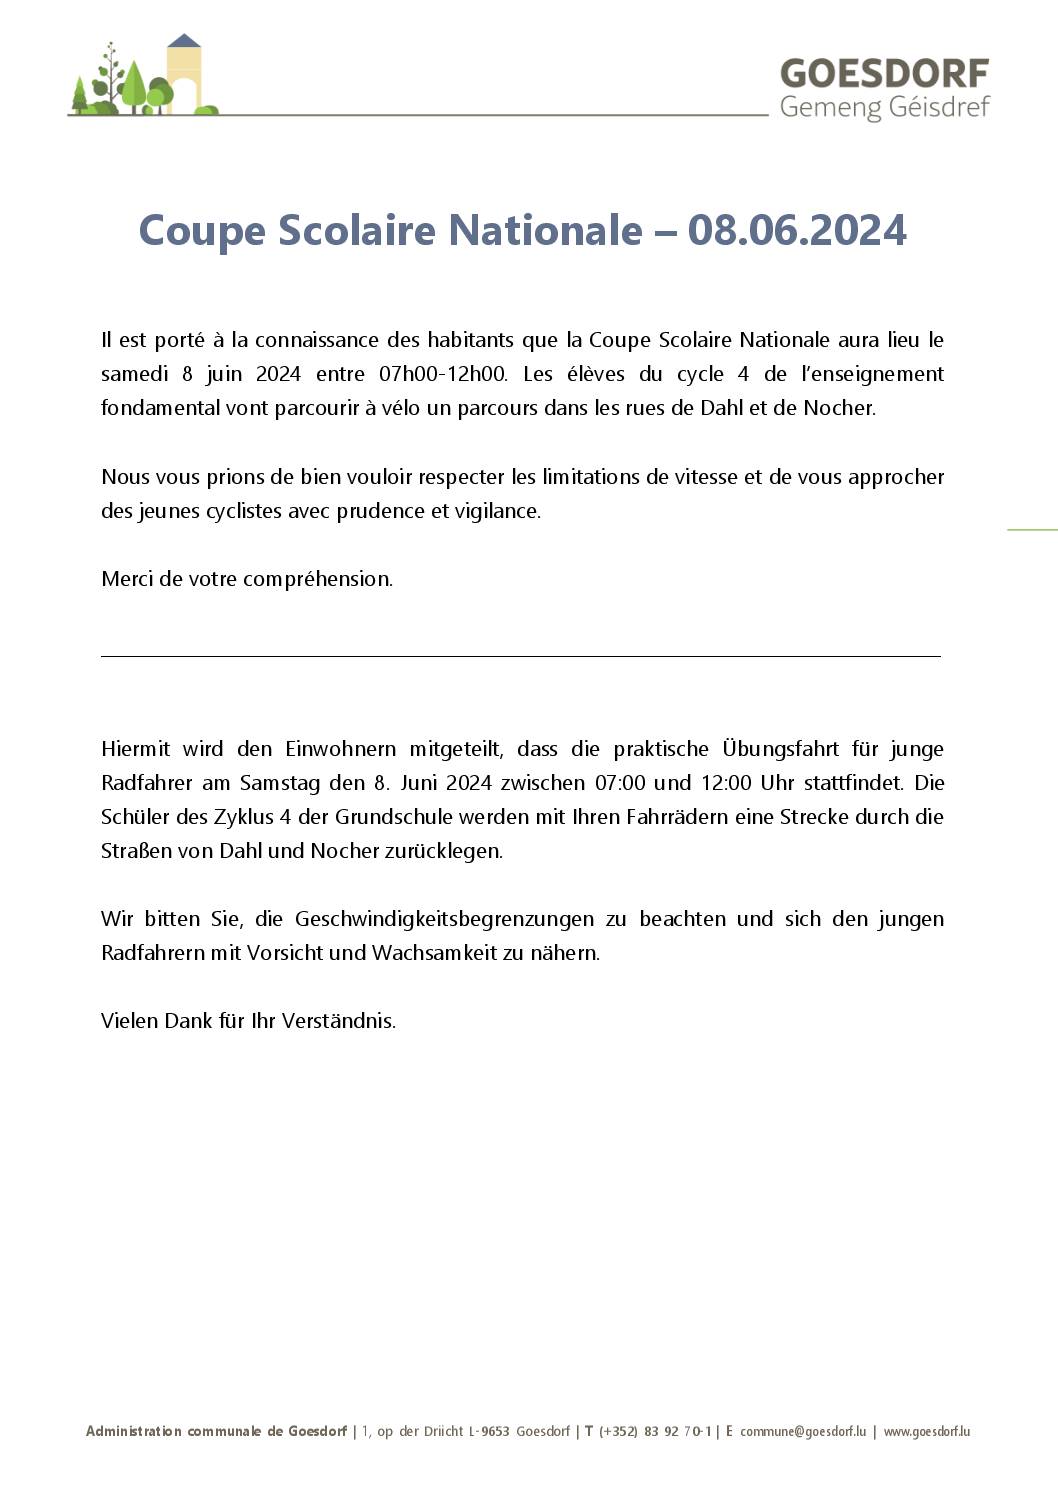 Coupe Scolaire Nationale - 08.06.2024